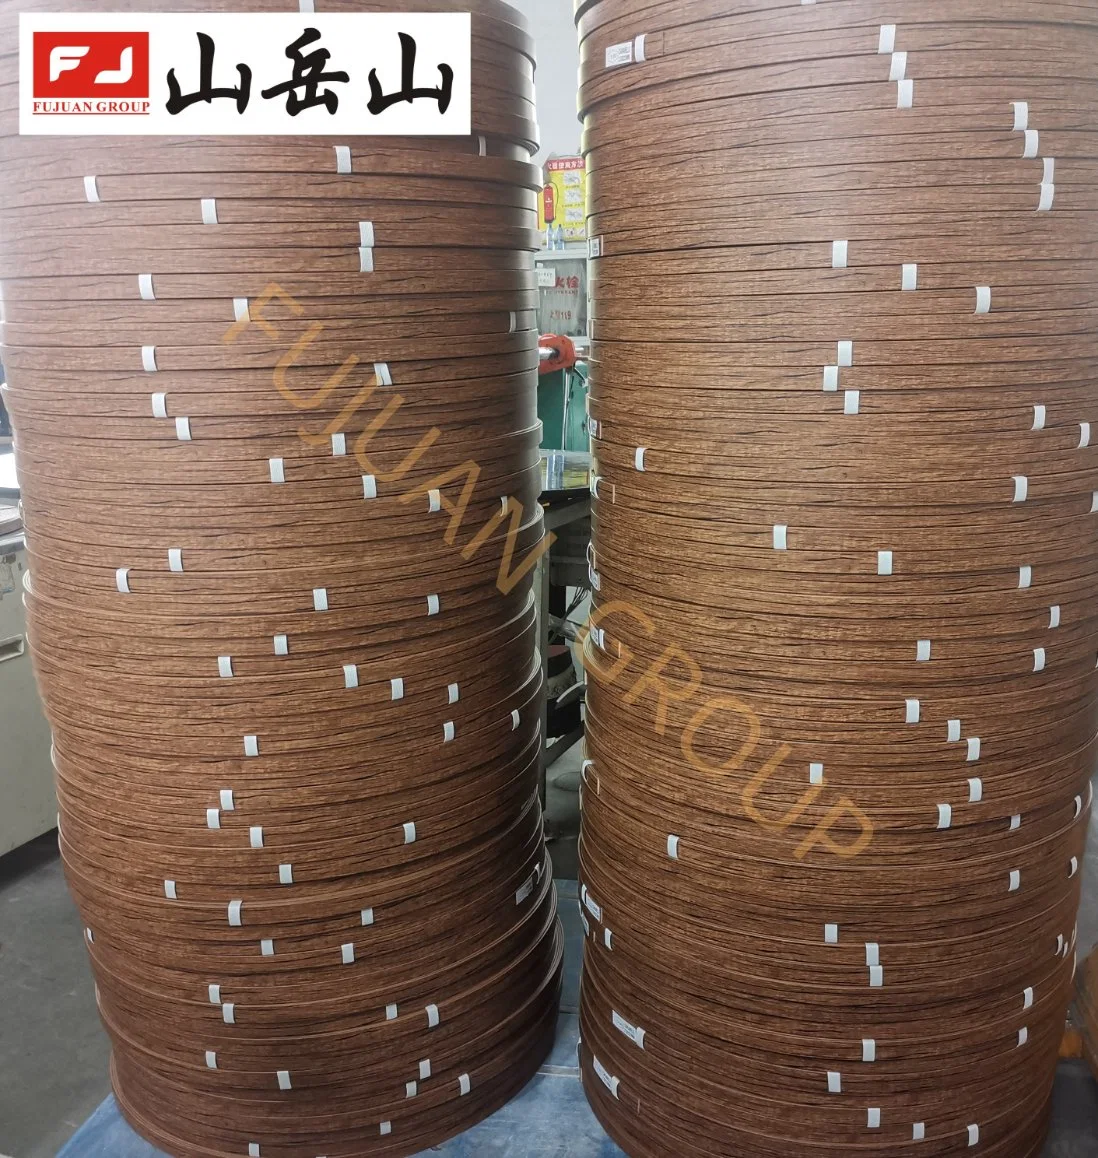 Fujuangroup PVC Edge Banding Tape Sealing Board and Furniture Accessories